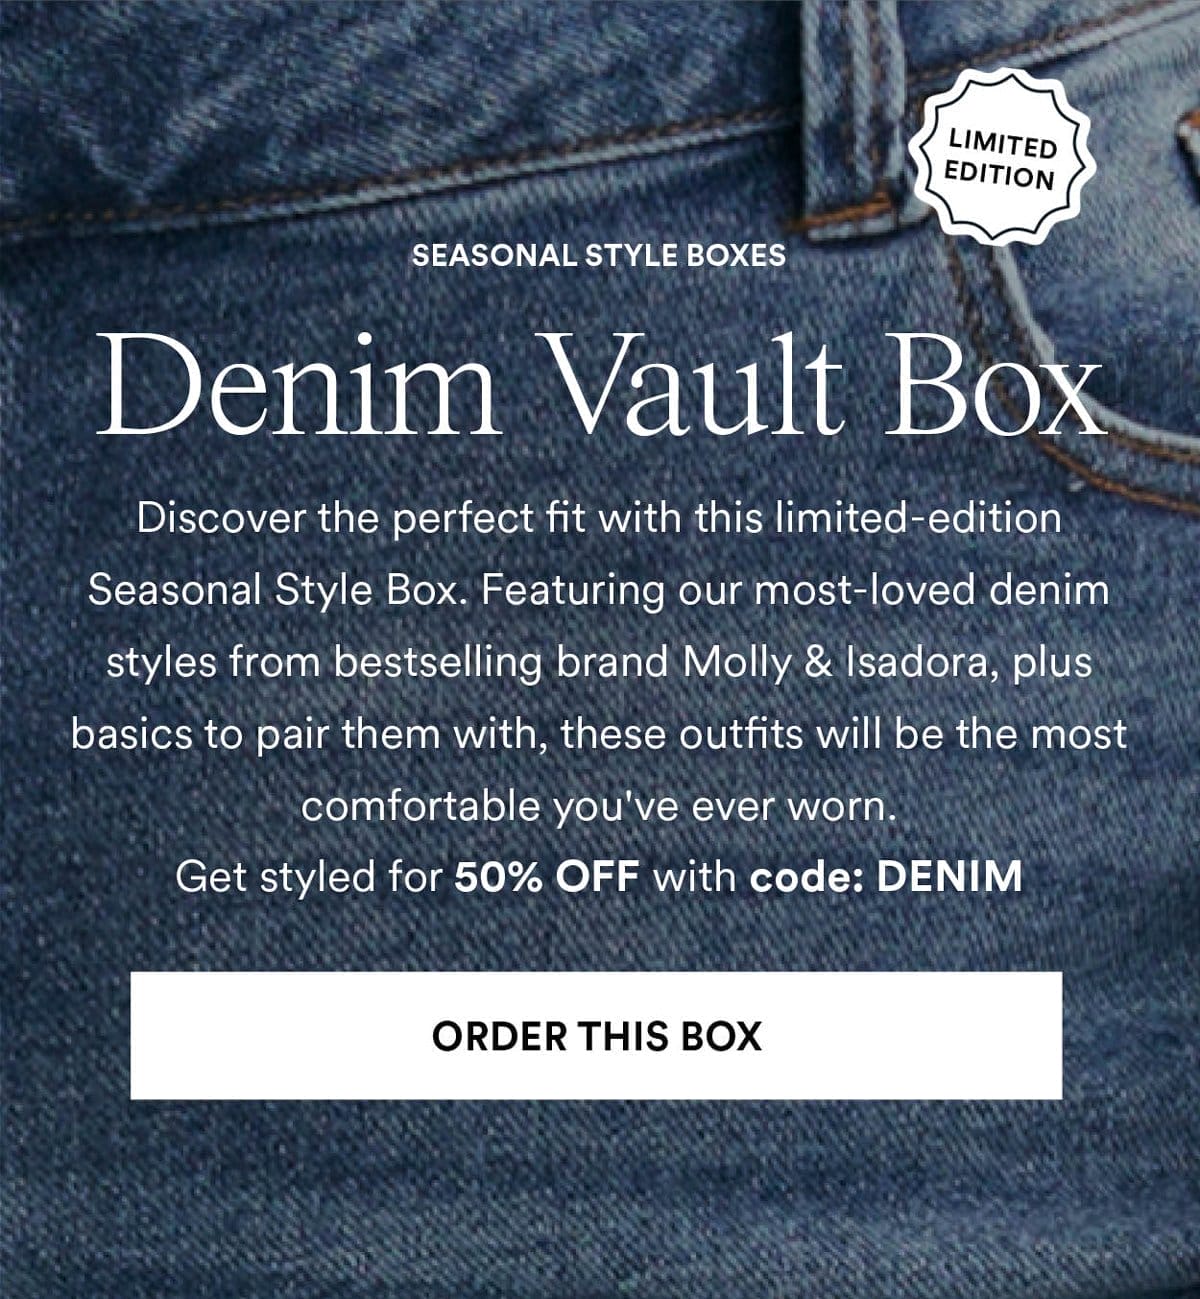 Denim Vault Box. Discover the perfect fit with this limited-edition Seasonal Style Box. Featuring our most-loved denim styles from bestselling brand Molly & Isadora, plus basics to pair them with, these outfits will be the most comfortable you ve ever worn. Get styled for 50% OFF with code: DENIM. Order This Box